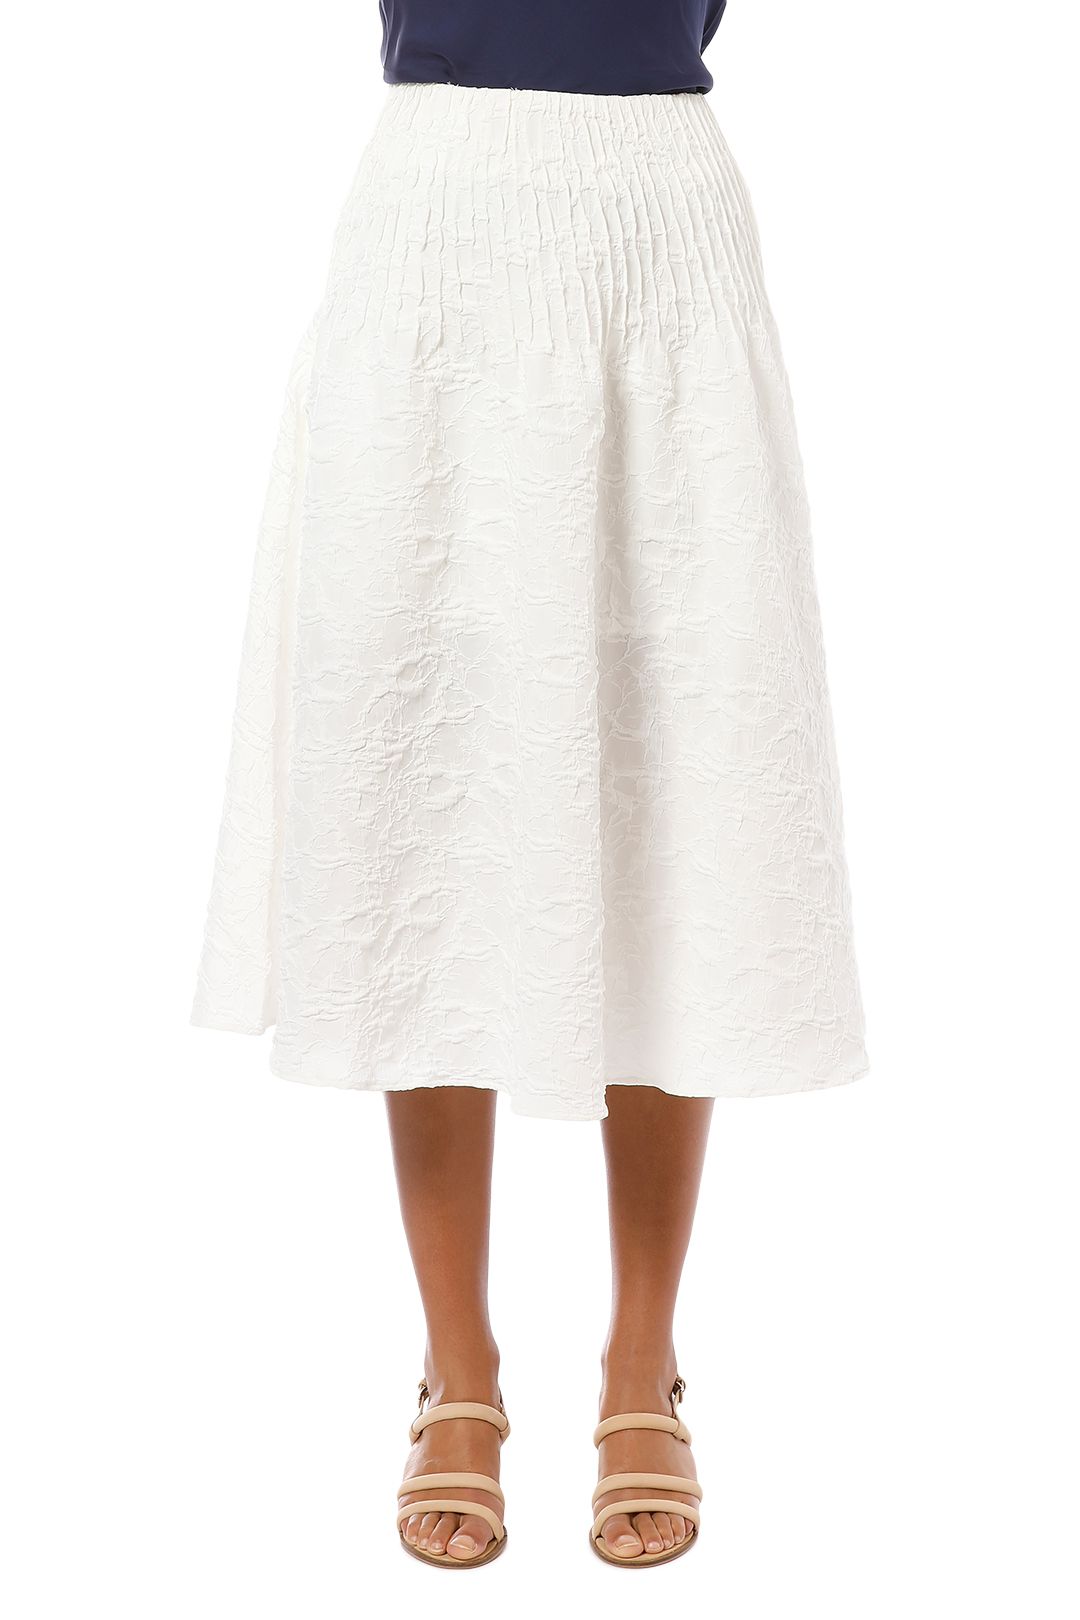 Friend of Audrey - Brooke Textured Full Skirt - White - Front Crop